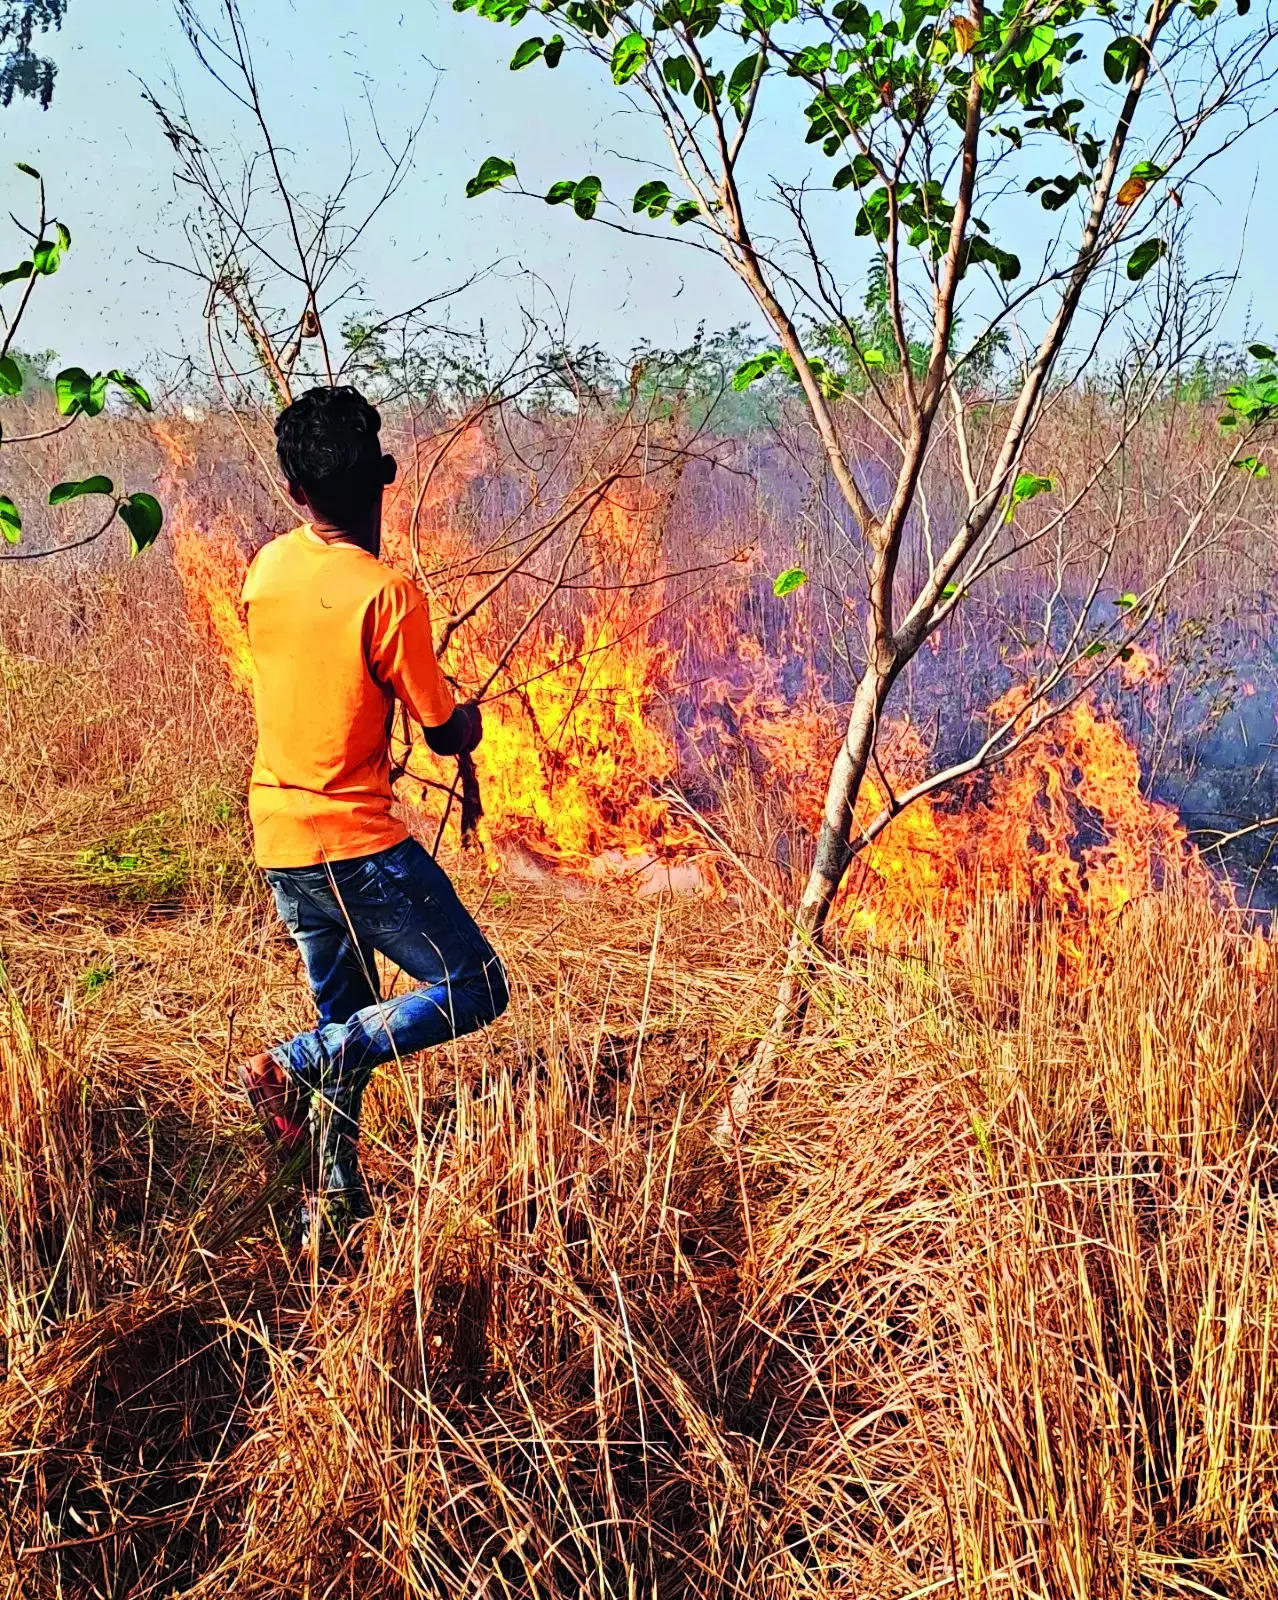 Two Fires In 15 Days In Urban Forest Keep Residents On Toes | Pune News – Times of India